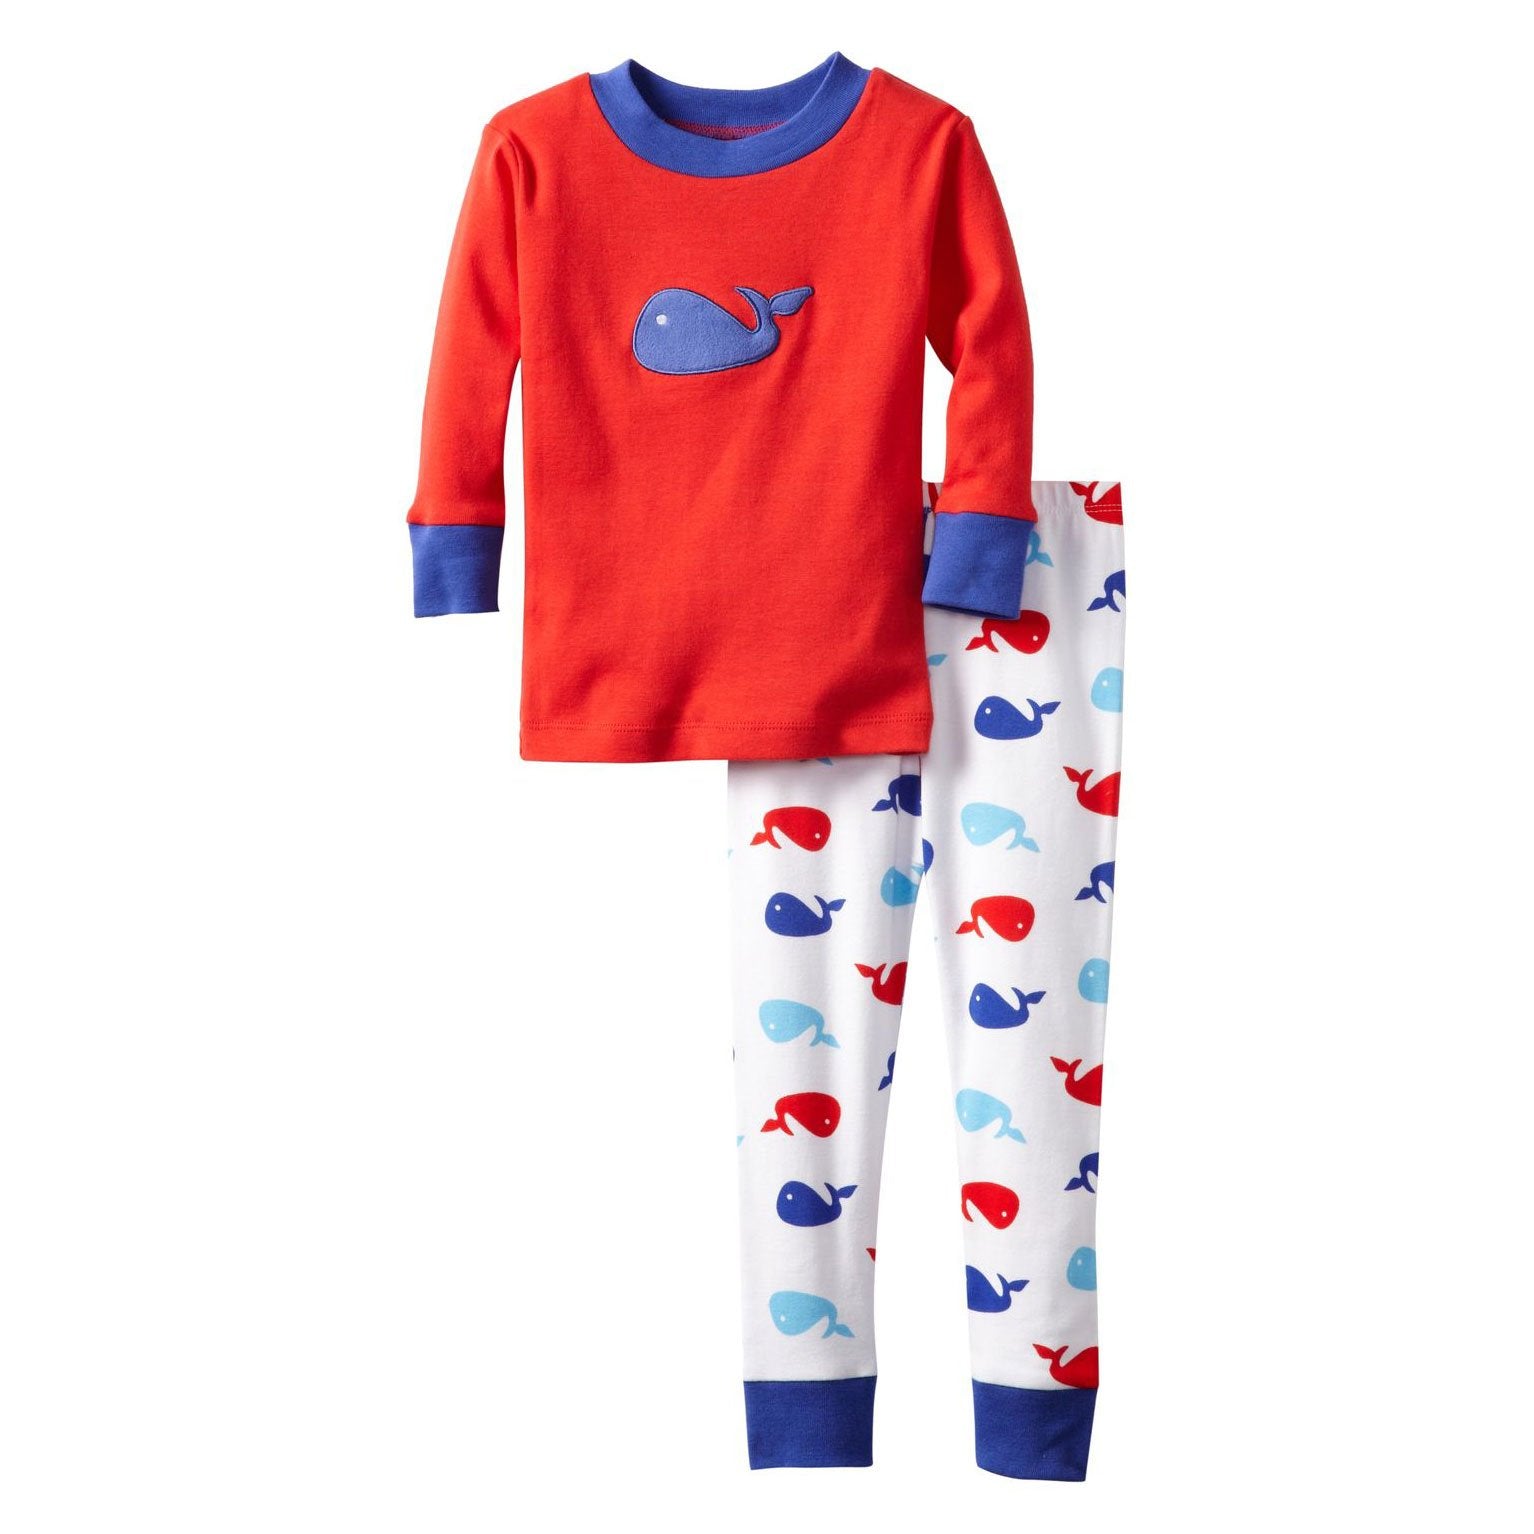 Little Boys Whale Pajamas by New Jammies - The Boy's Store